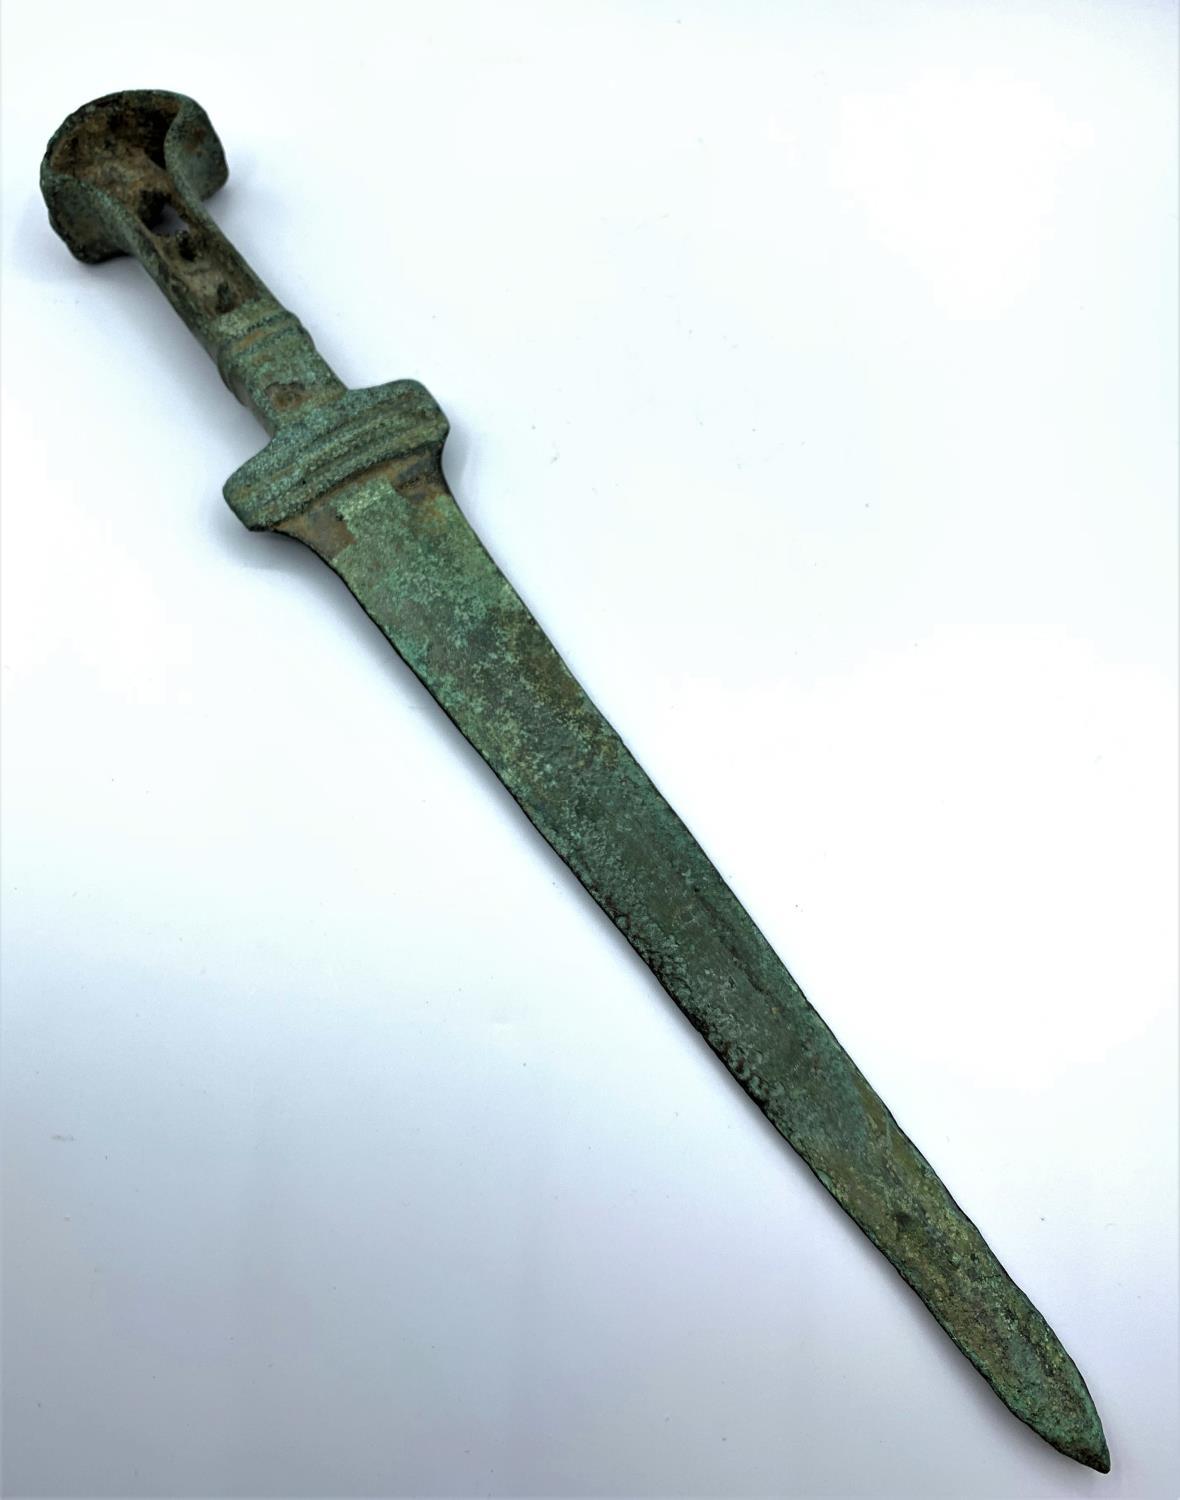 A bronze dagger in the Gladius style, believes to be from Roman era. Wrighing 343g and is 33cm long.